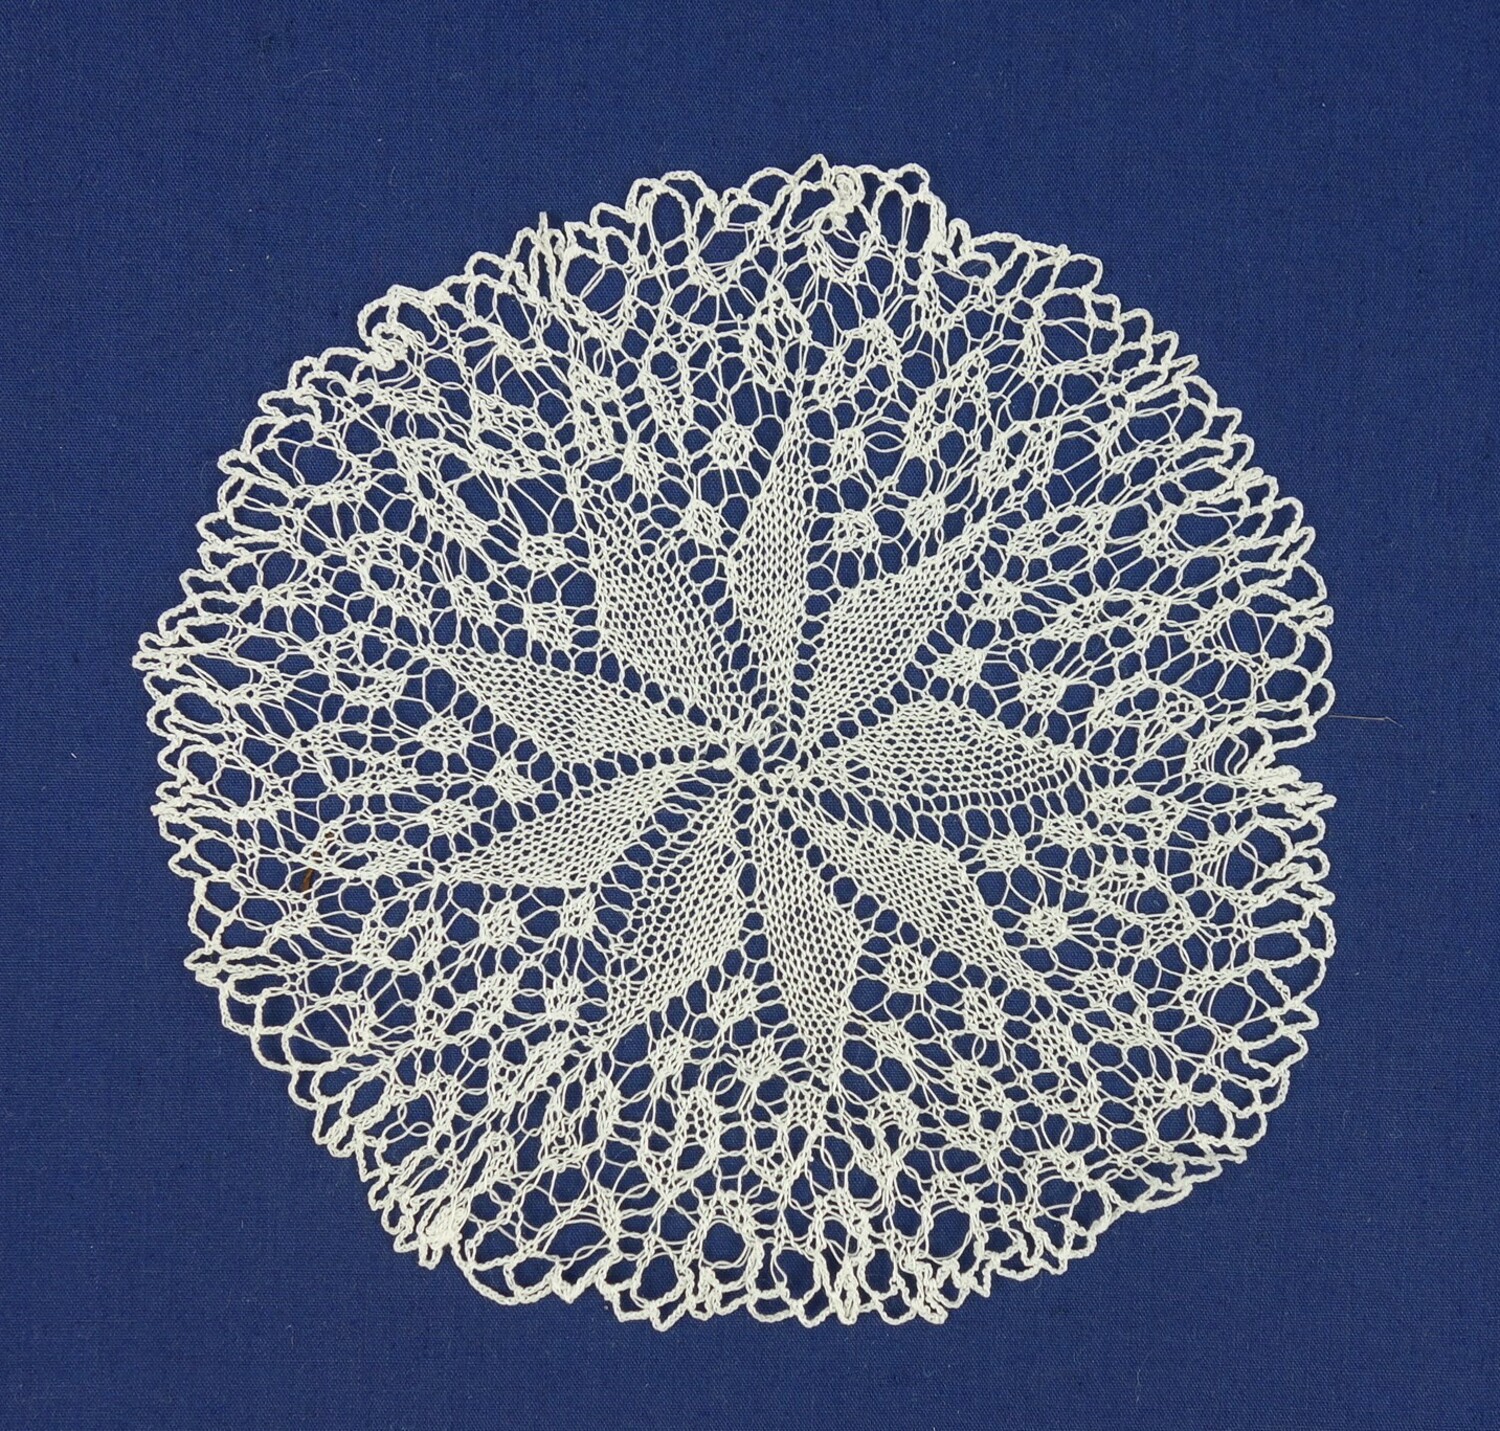 Doily made of knitted lace (TRC 2014.0555).